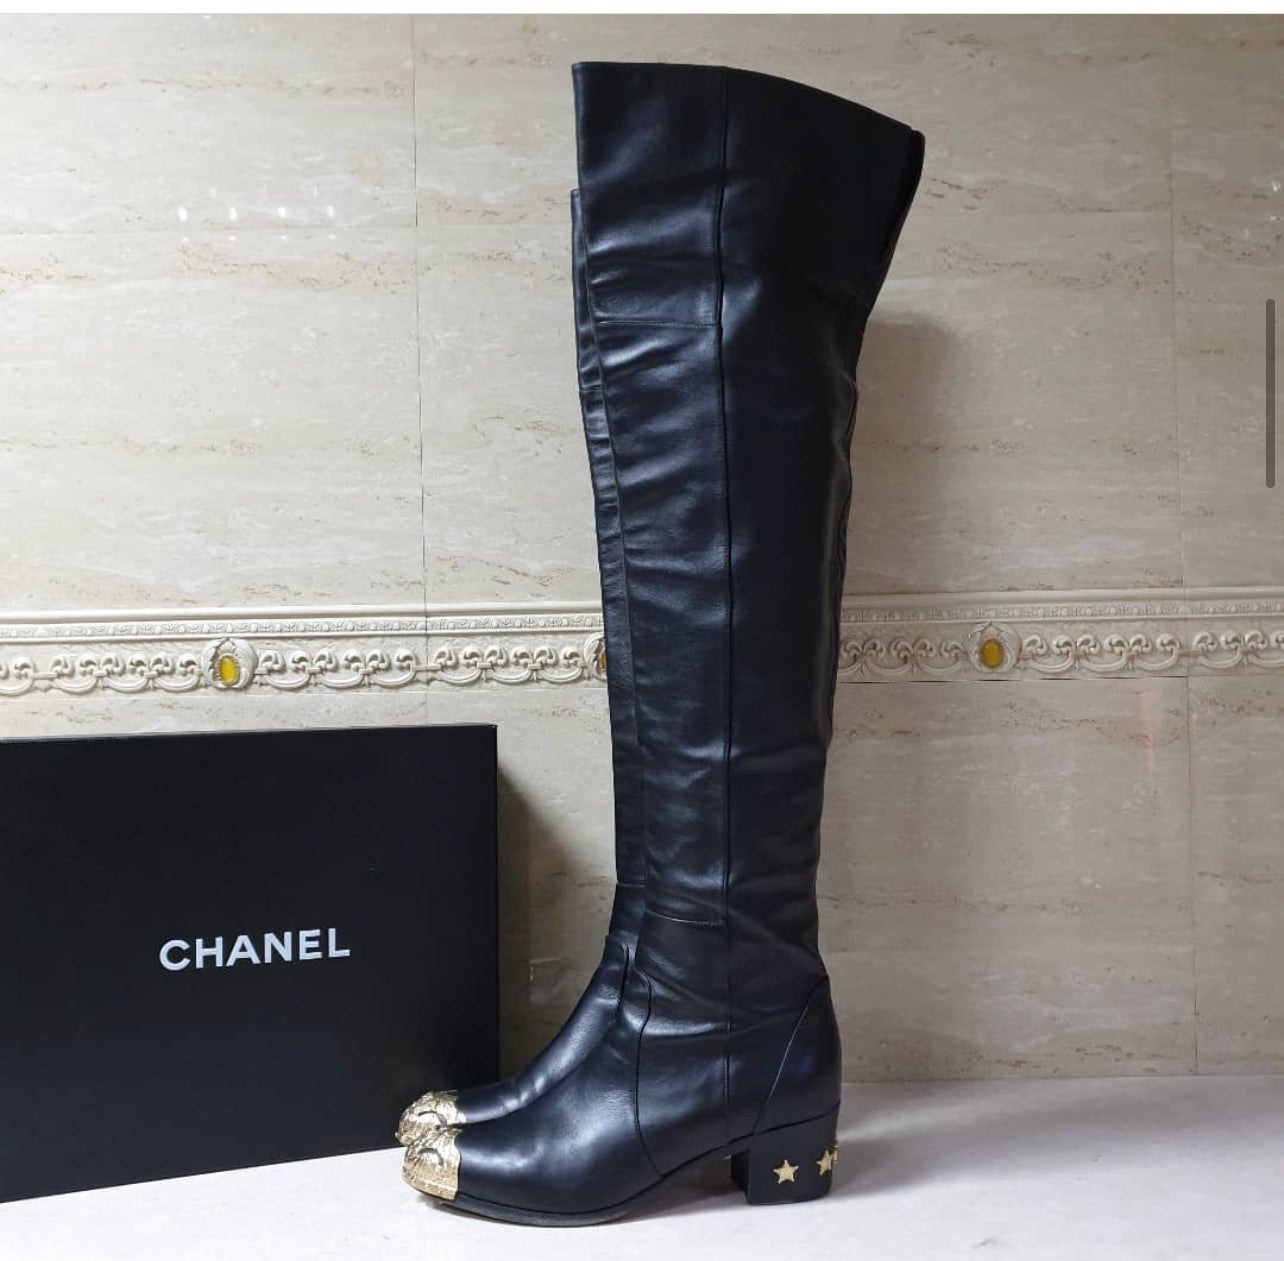 $3400 Thigh High Chanel Boots Grey Metallic Pointed Dallas 39 Womens Shoes